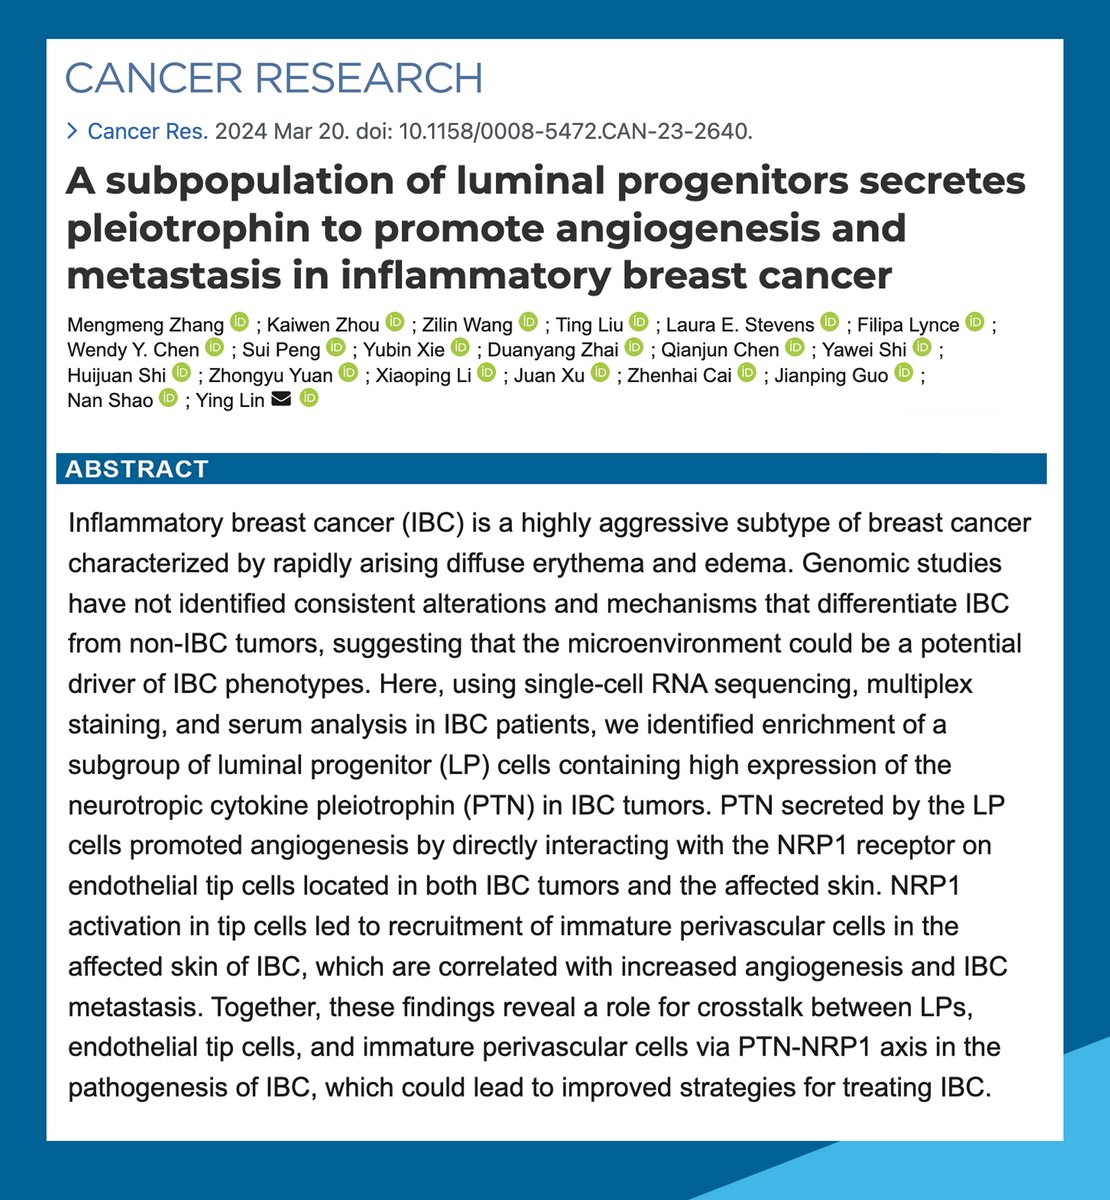 This recent study examined a subpopulation of luminal progenitors secretes pleiotrophin to promote angiogenesis and metastasis in #InflammatoryBreastCancer, read it here👇 @FilipaLynce #IBC pubmed.ncbi.nlm.nih.gov/38507720/